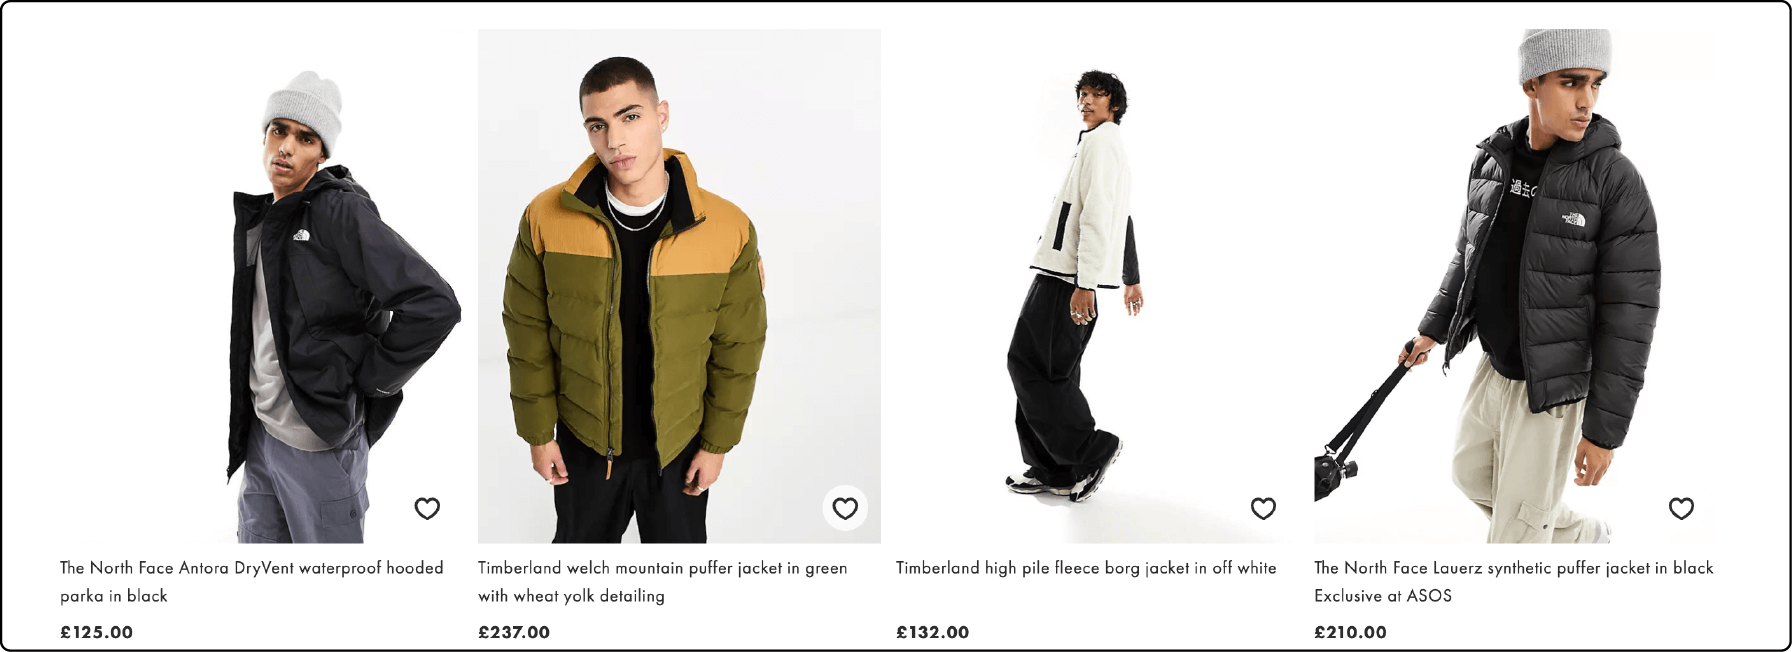 ASOS's High-Quality Magento Product Images